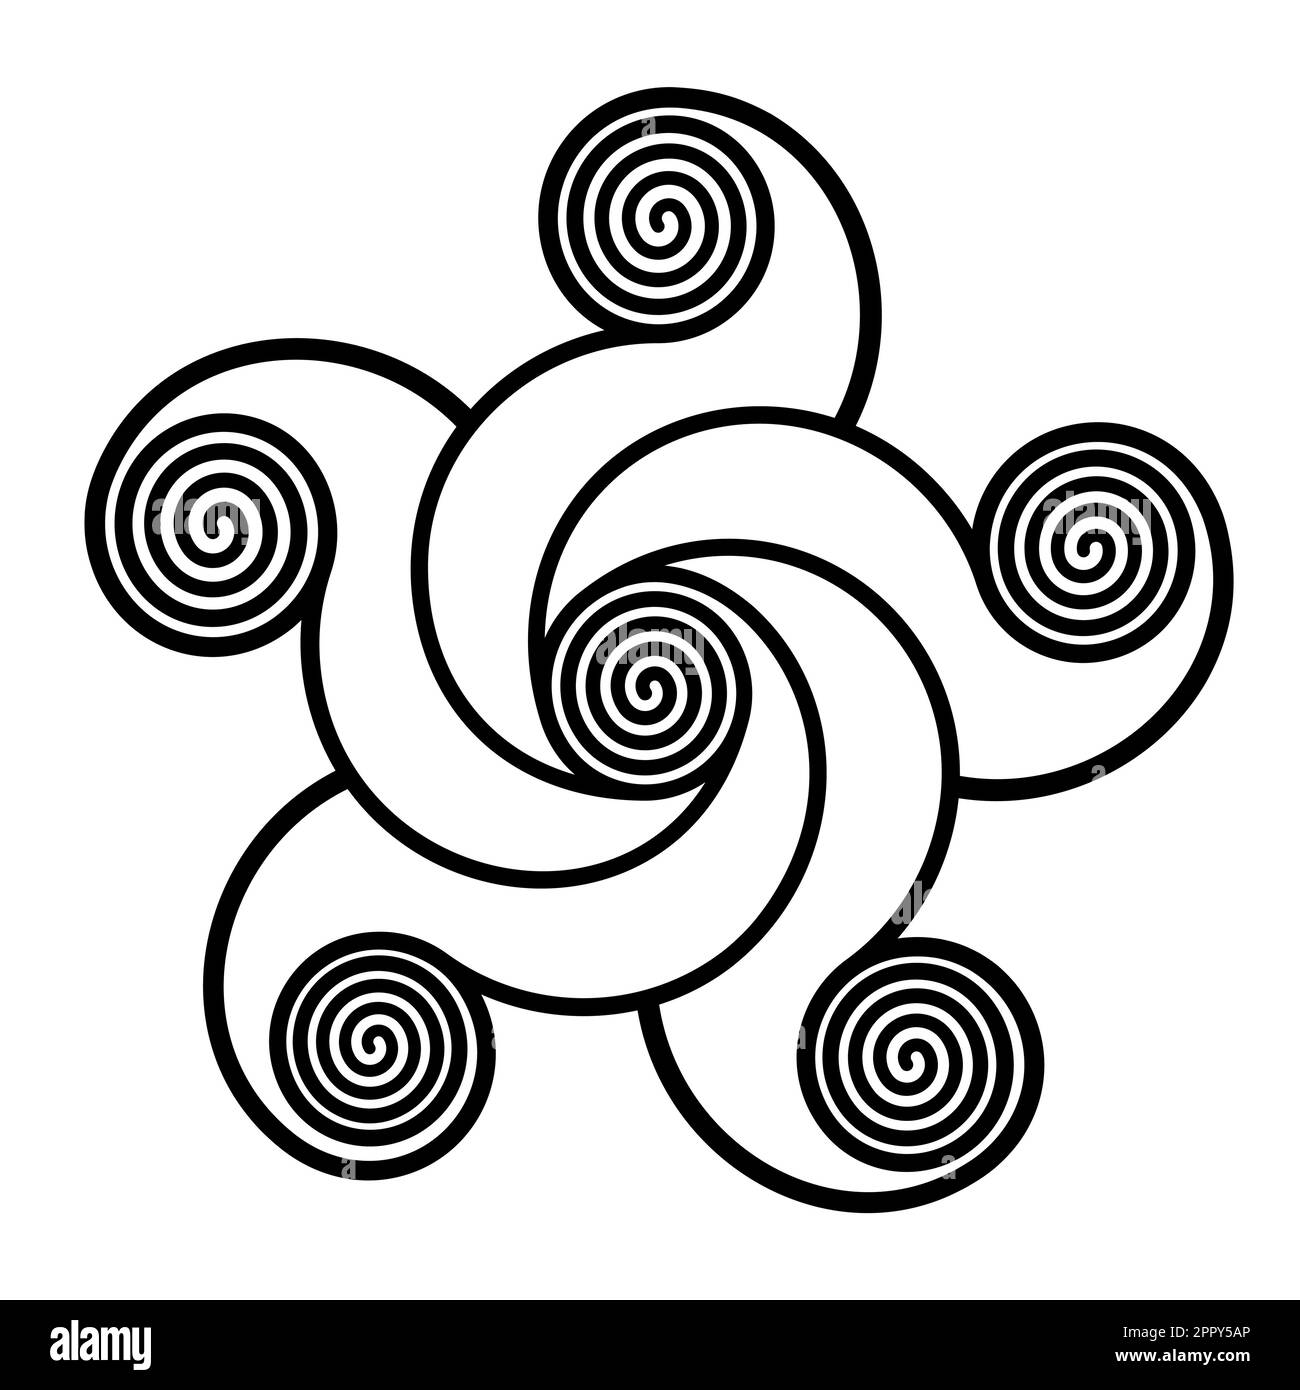 Spirals forming a pentagram shaped star, crop circle pattern Stock Vector